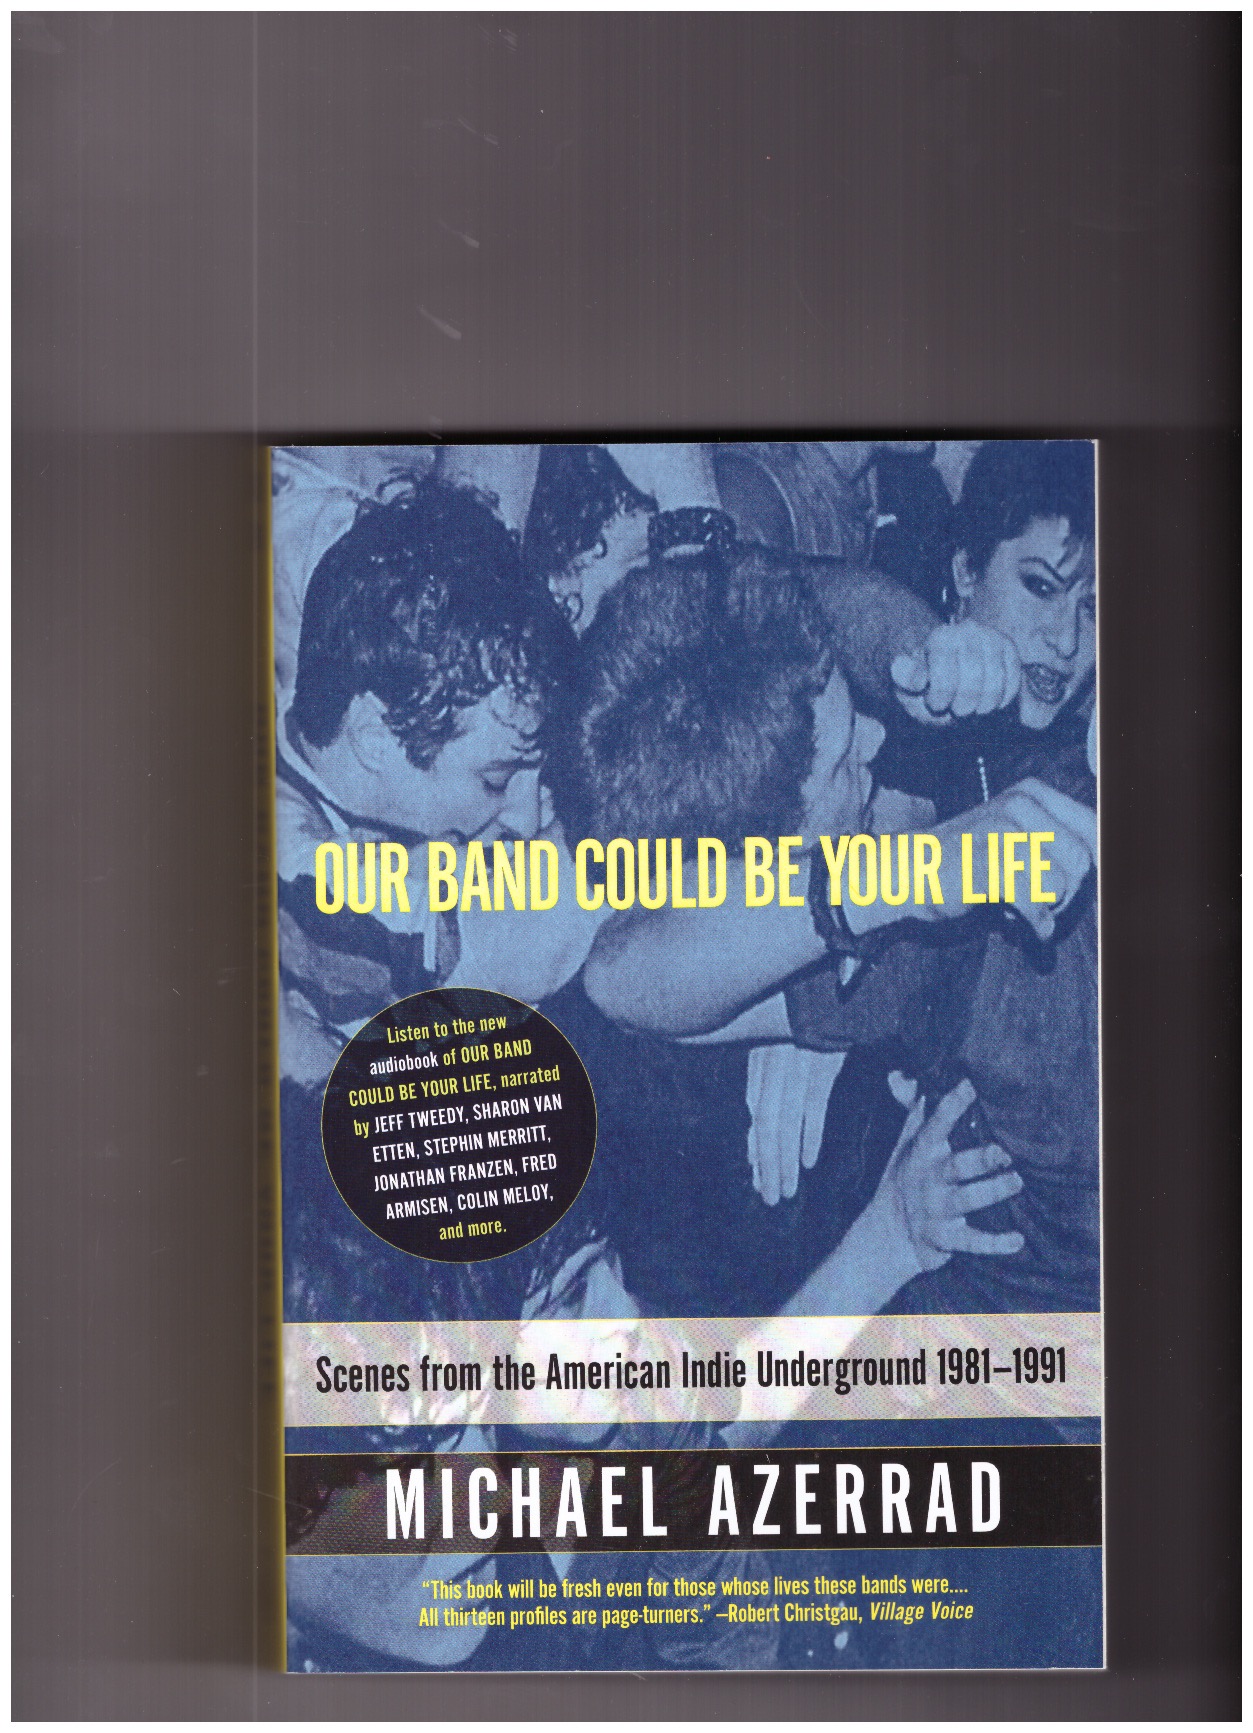 AZERRAD, Michael - Our Band Could Be Your Life (Scenes from the American Indie Underground, 1981-1991)